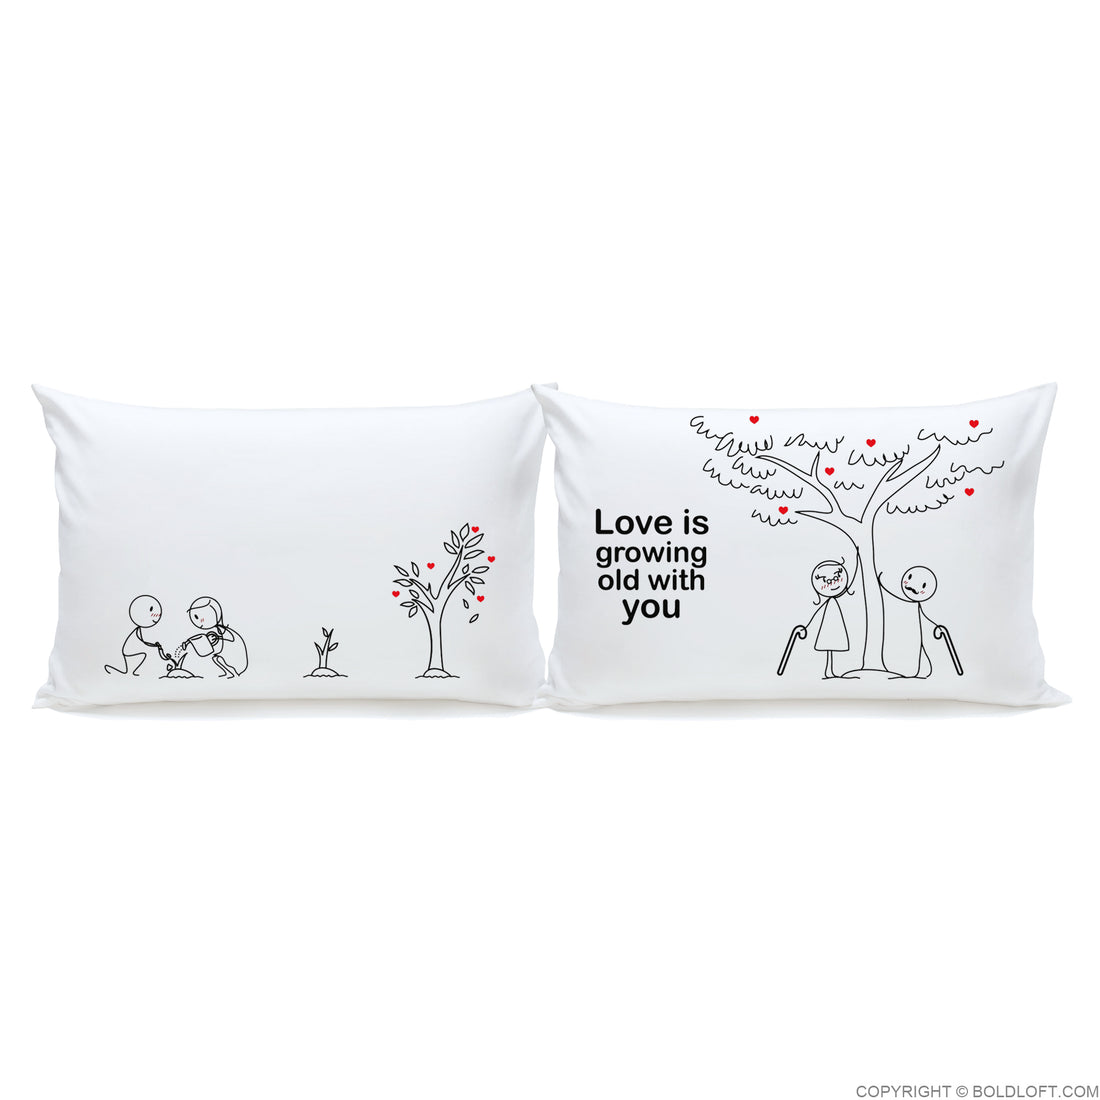 Together in Love™ Couple Gift Set I